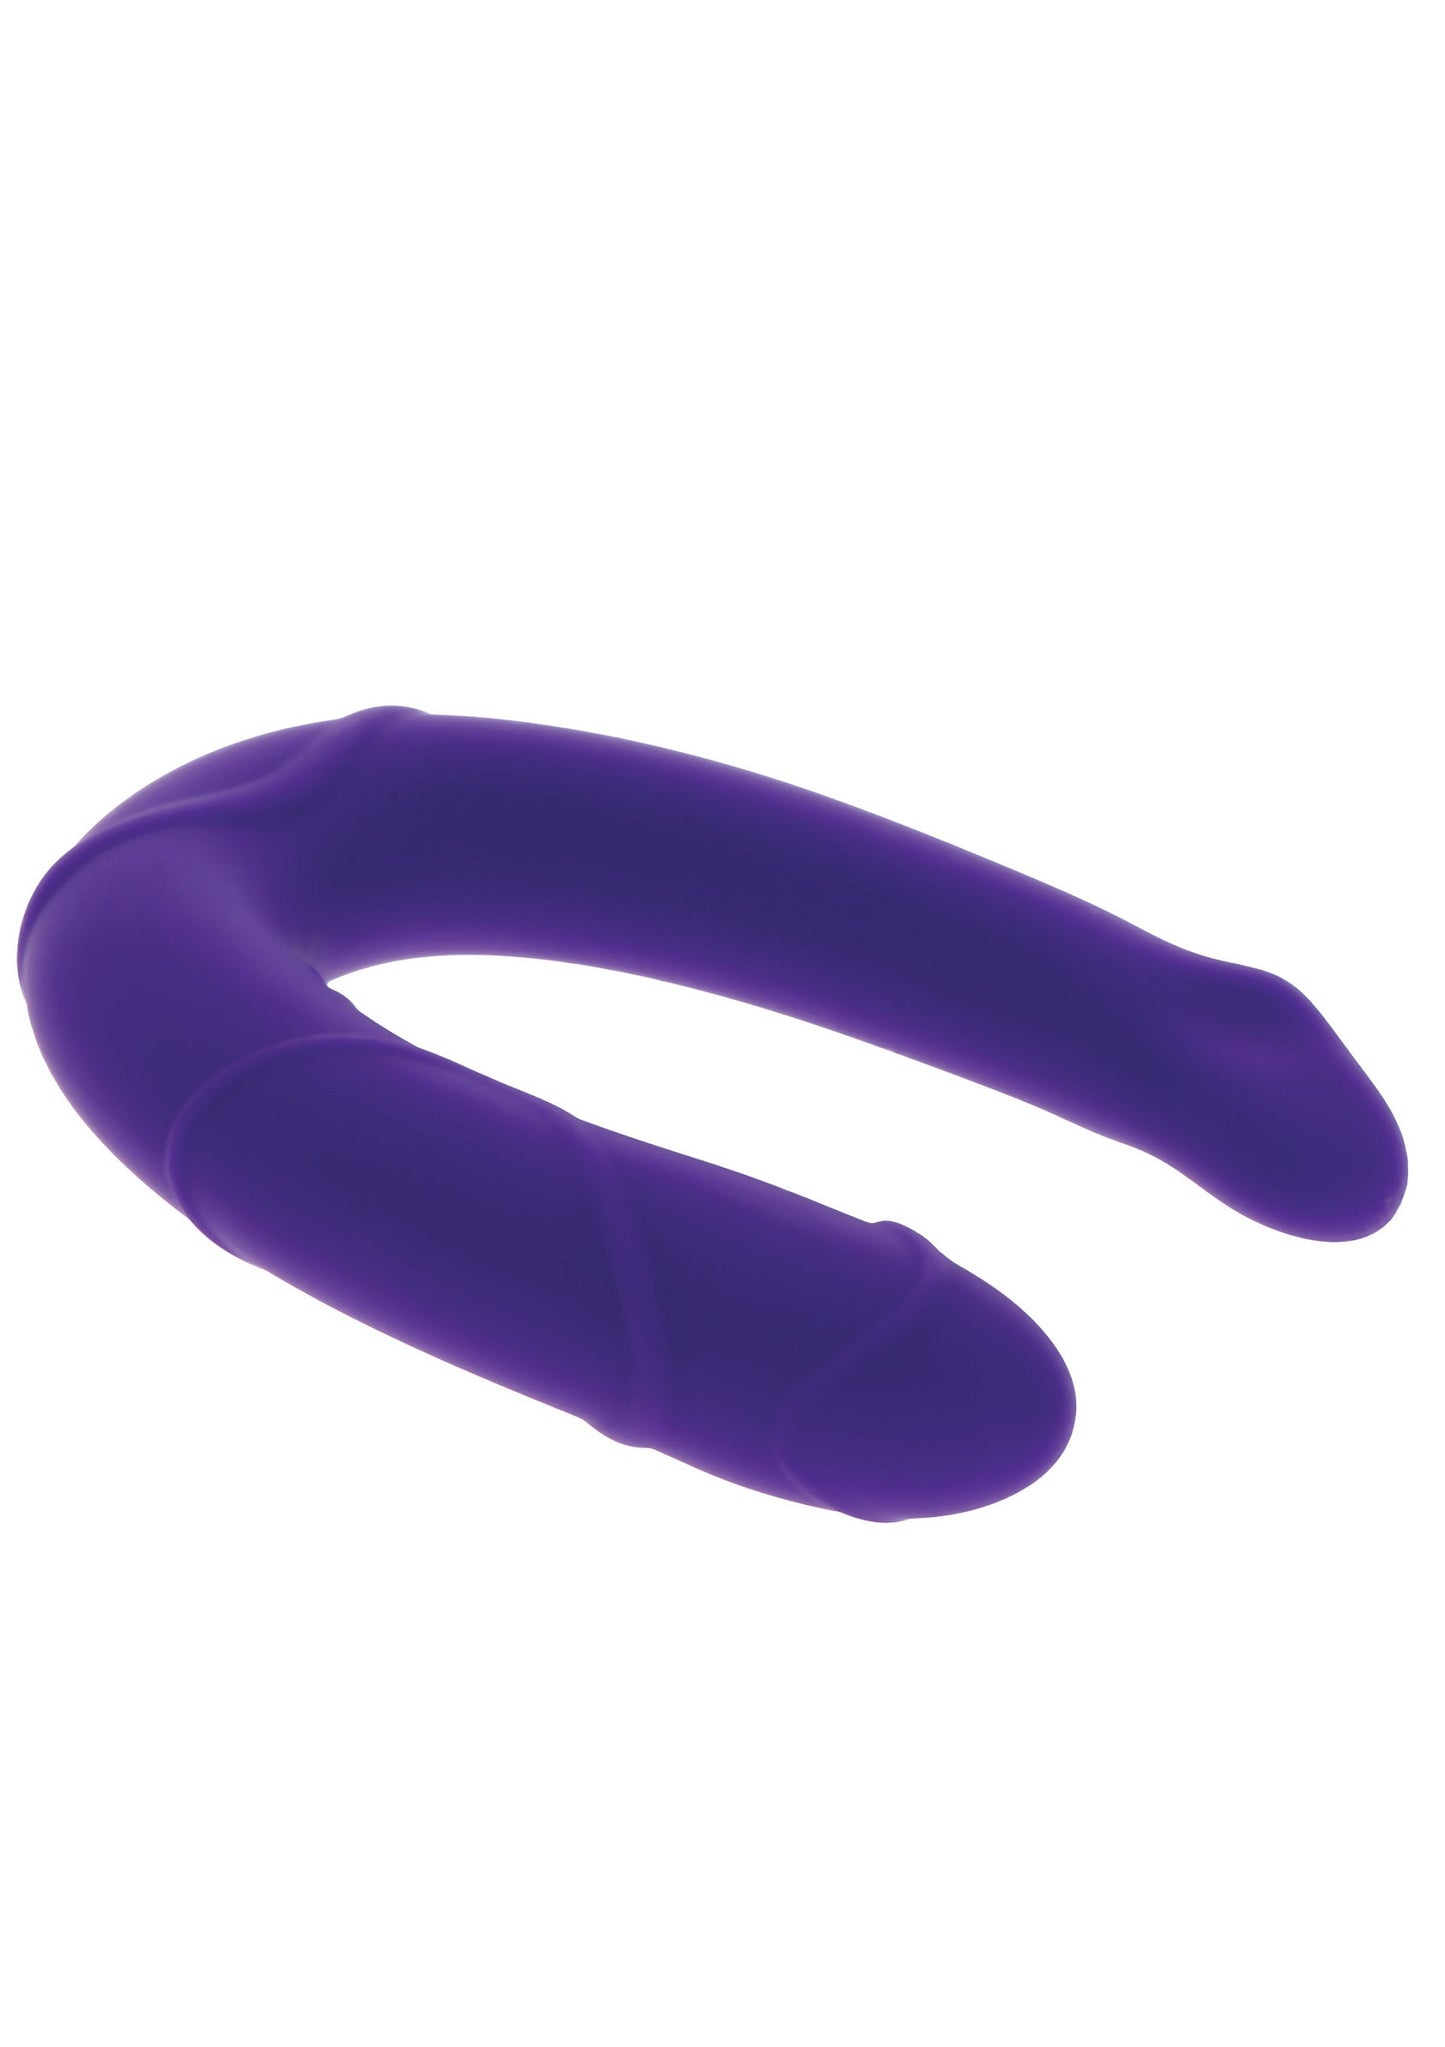 ToyJoy Get Real Vogue Mini Double Dong PURPLE - 1